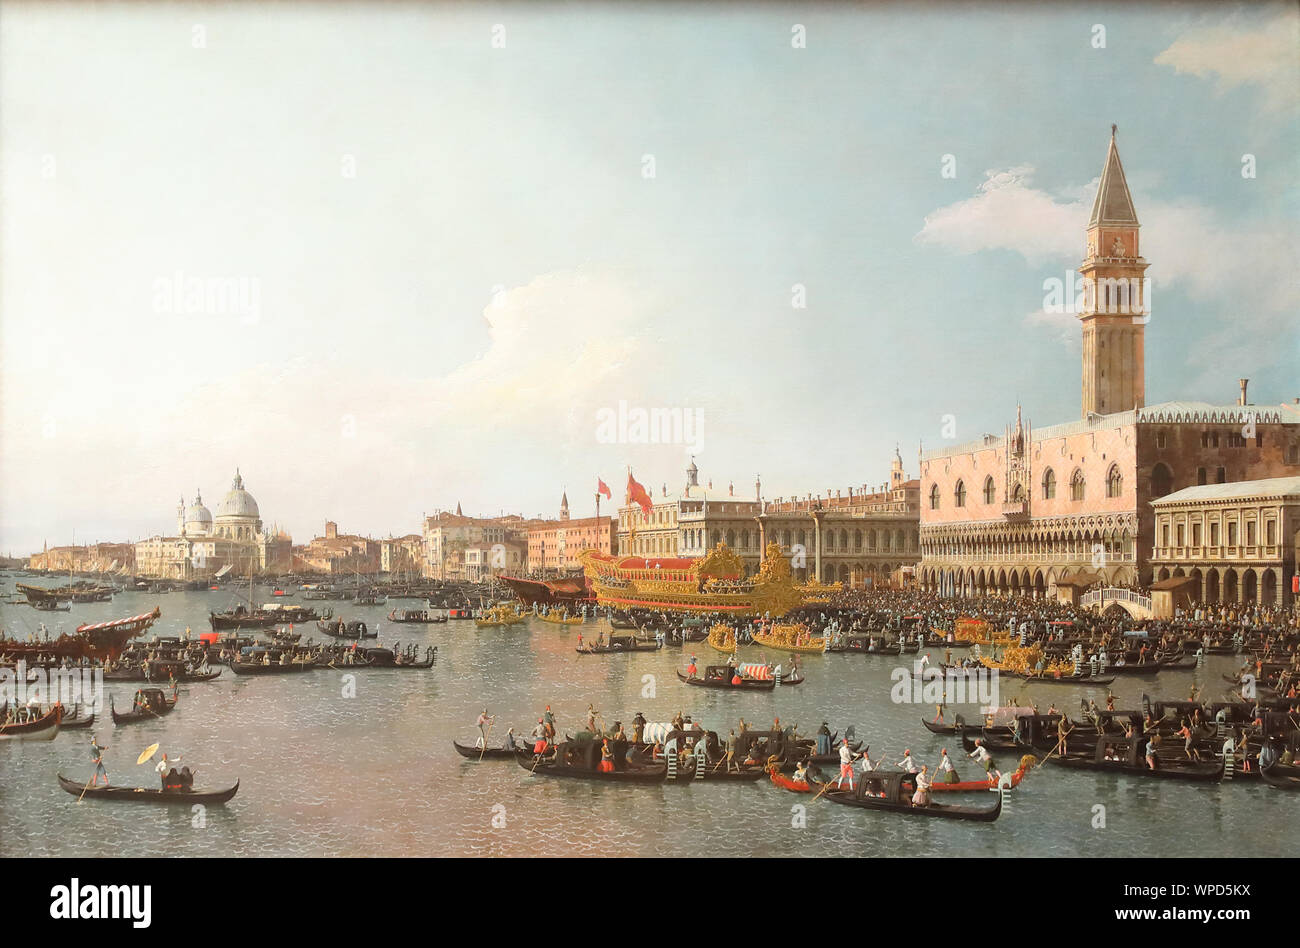 The Painting Venice: The Basin of San Marco on Ascension Day des italienischen Malers Canaletto in der National Gallery, London, Großbritannien Stockfoto